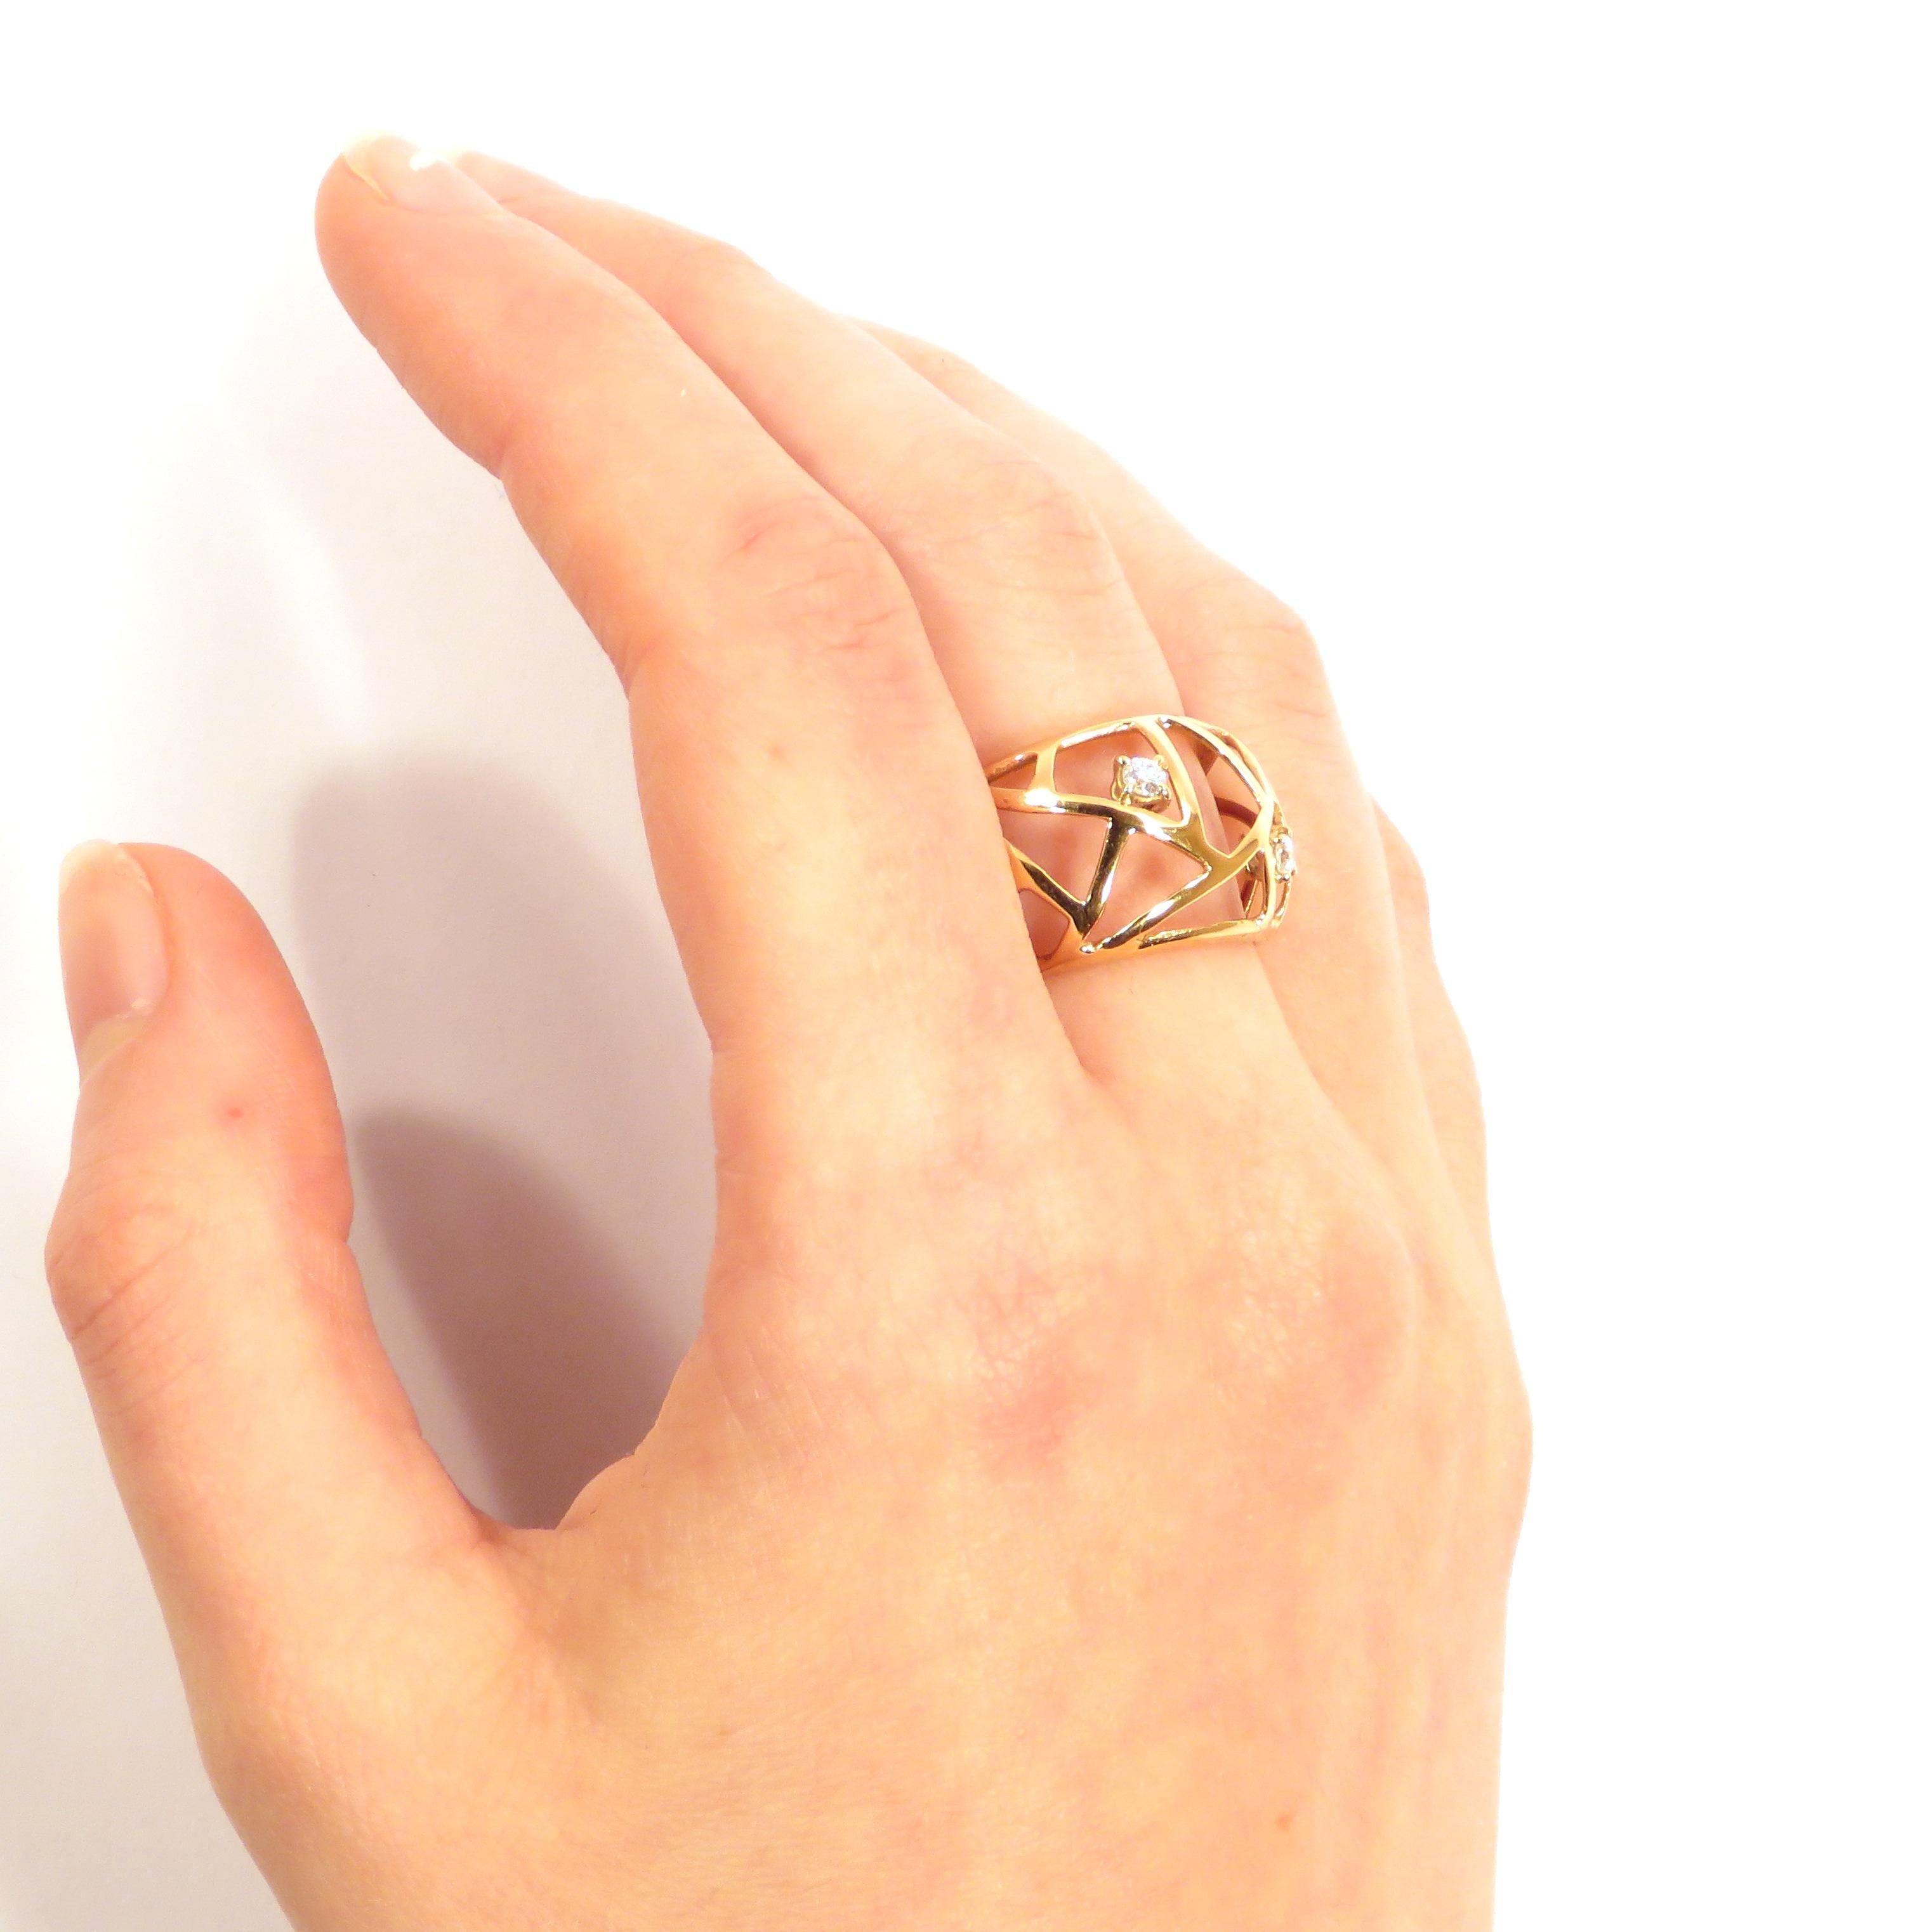 Round Cut 18 Karat Rose Gold Diamonds Ring Handcrafted in Italy by Botta Gioielli